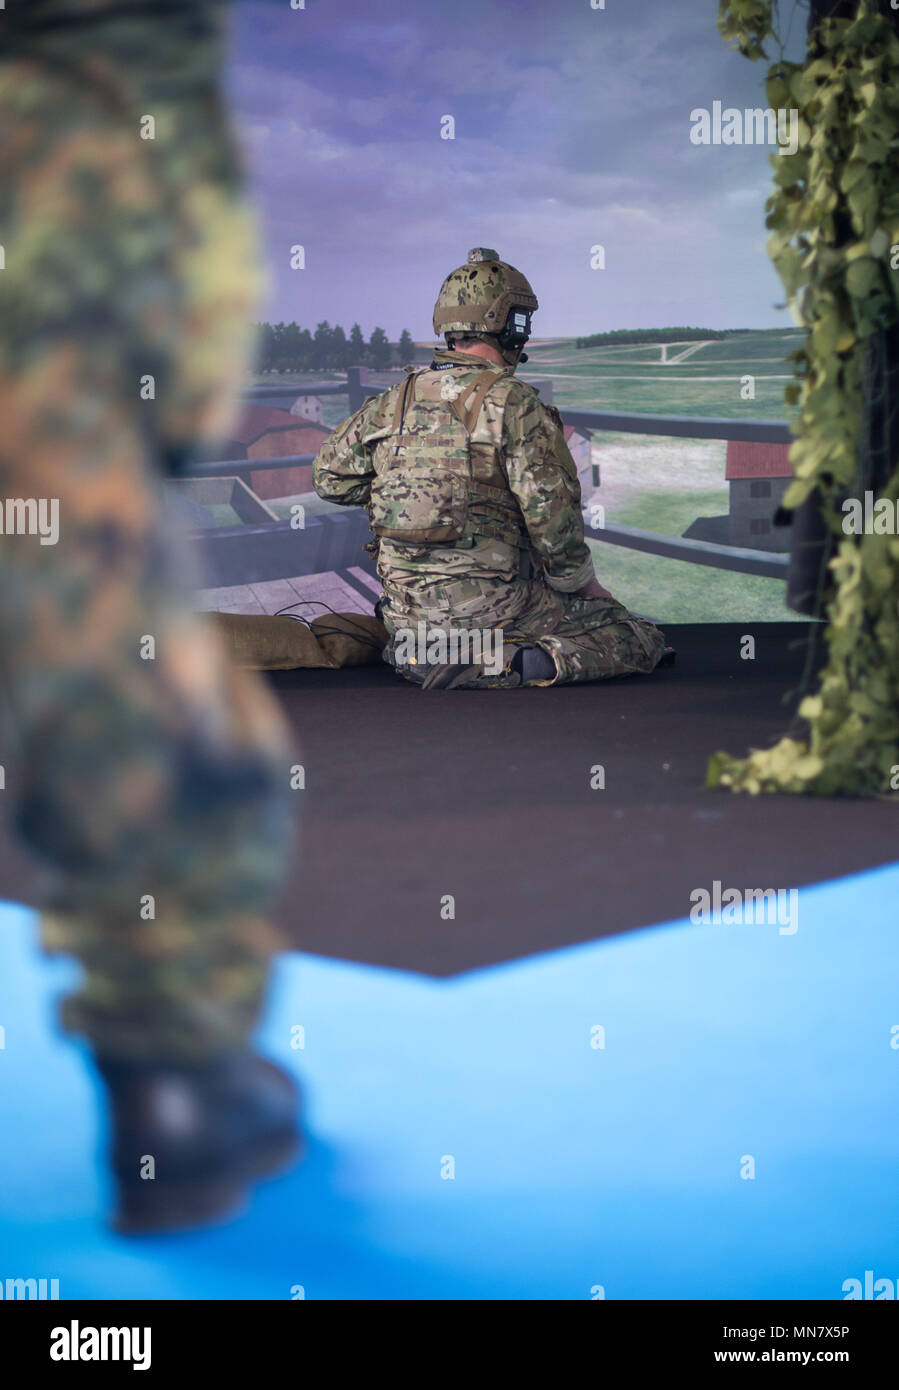 Stuttgart, Germany. 15th May, 2018. 15 May 2018, Germany, Stuttgart: An extra uses a simulation programme by the company Holovis on the first day of the ITEC fair for military and weapons technology. The fair, which presents training and simulation software, among others, is running from 15 to 17 May. It is accompanied by demonstrations by opponents of weaponry. Photo: Sebastian Gollnow/dpa Credit: dpa picture alliance/Alamy Live News Stock Photo